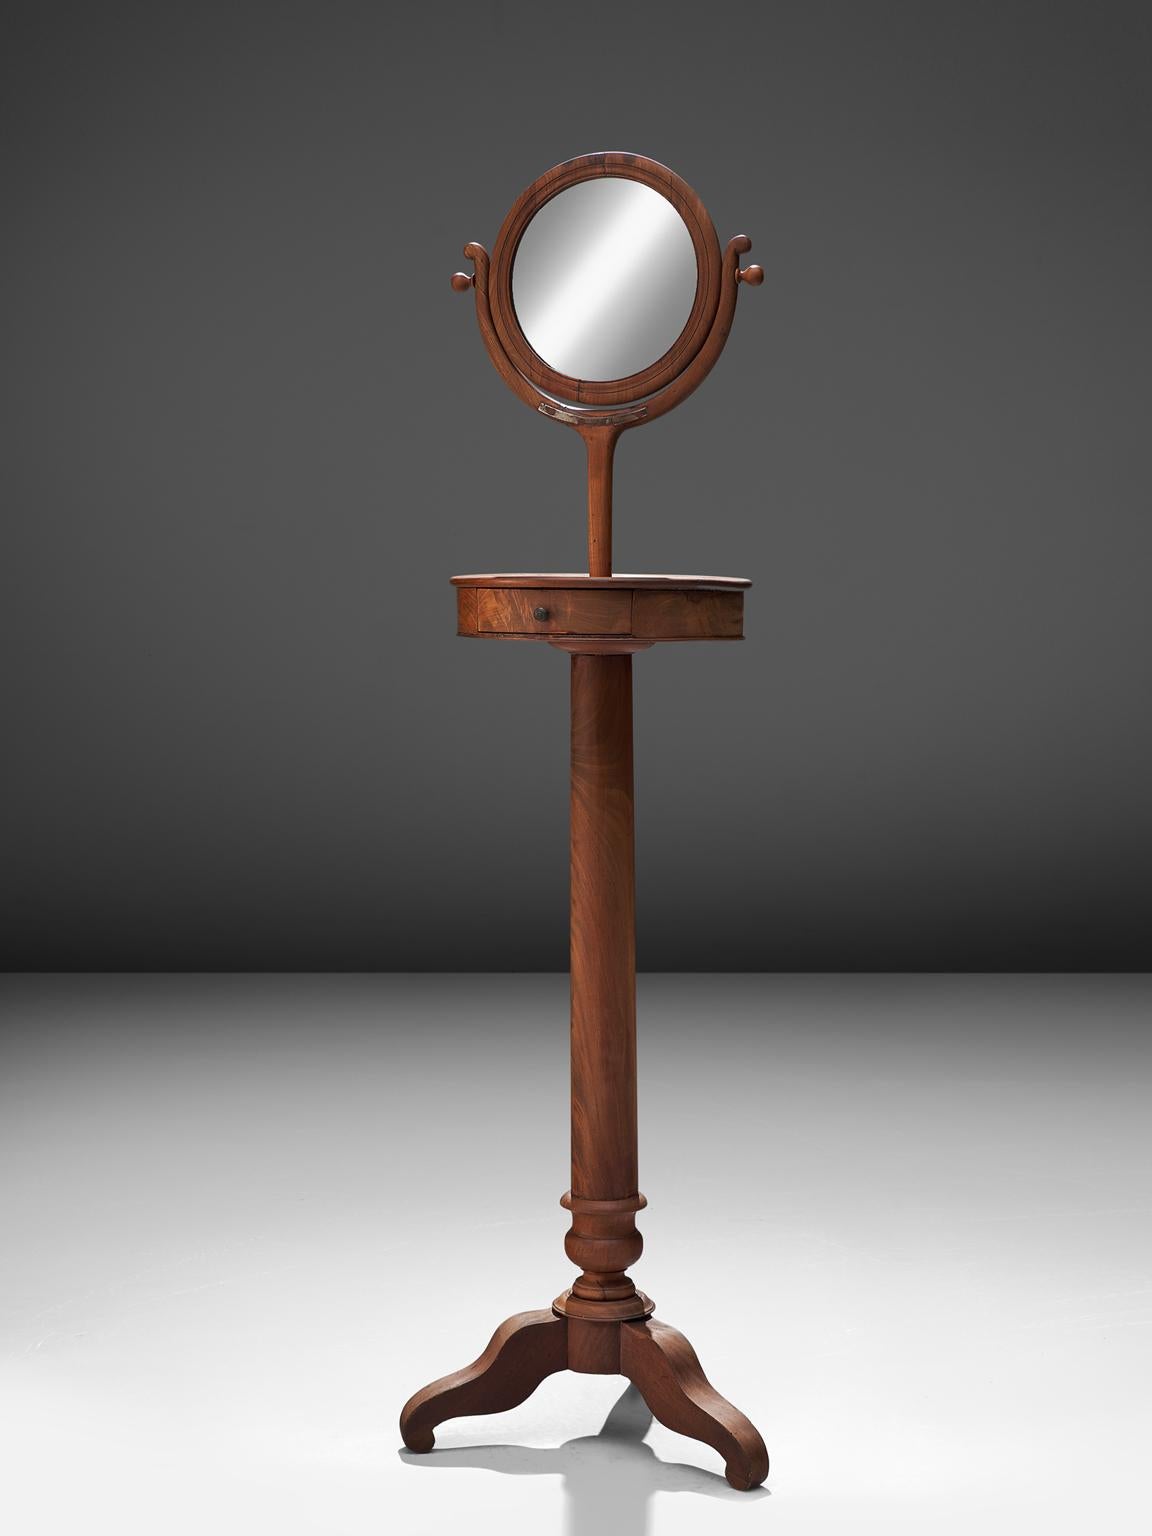 Pedestal mirror, mahogany, Italy, 1940s.

This classic piece has been executed in the finest mahogany with a waving, flowing pattern. The piece has a tripod foot. A small drawer and a small round mirror. It is the perfect piece to function as a